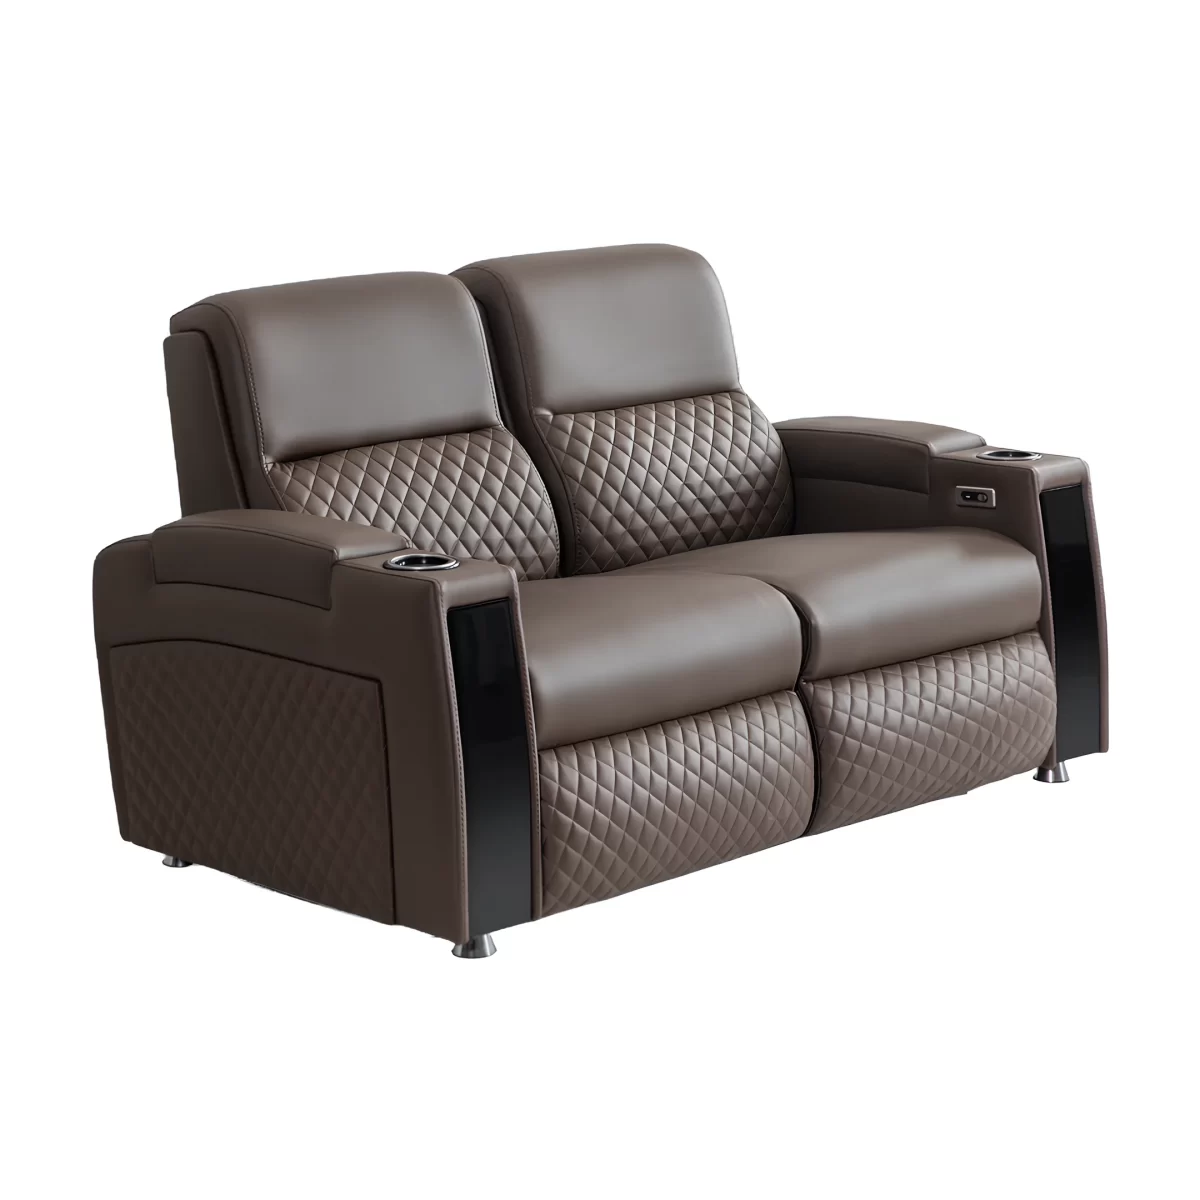 palma double reclining sofa electric recliner for home theater loveseat 7